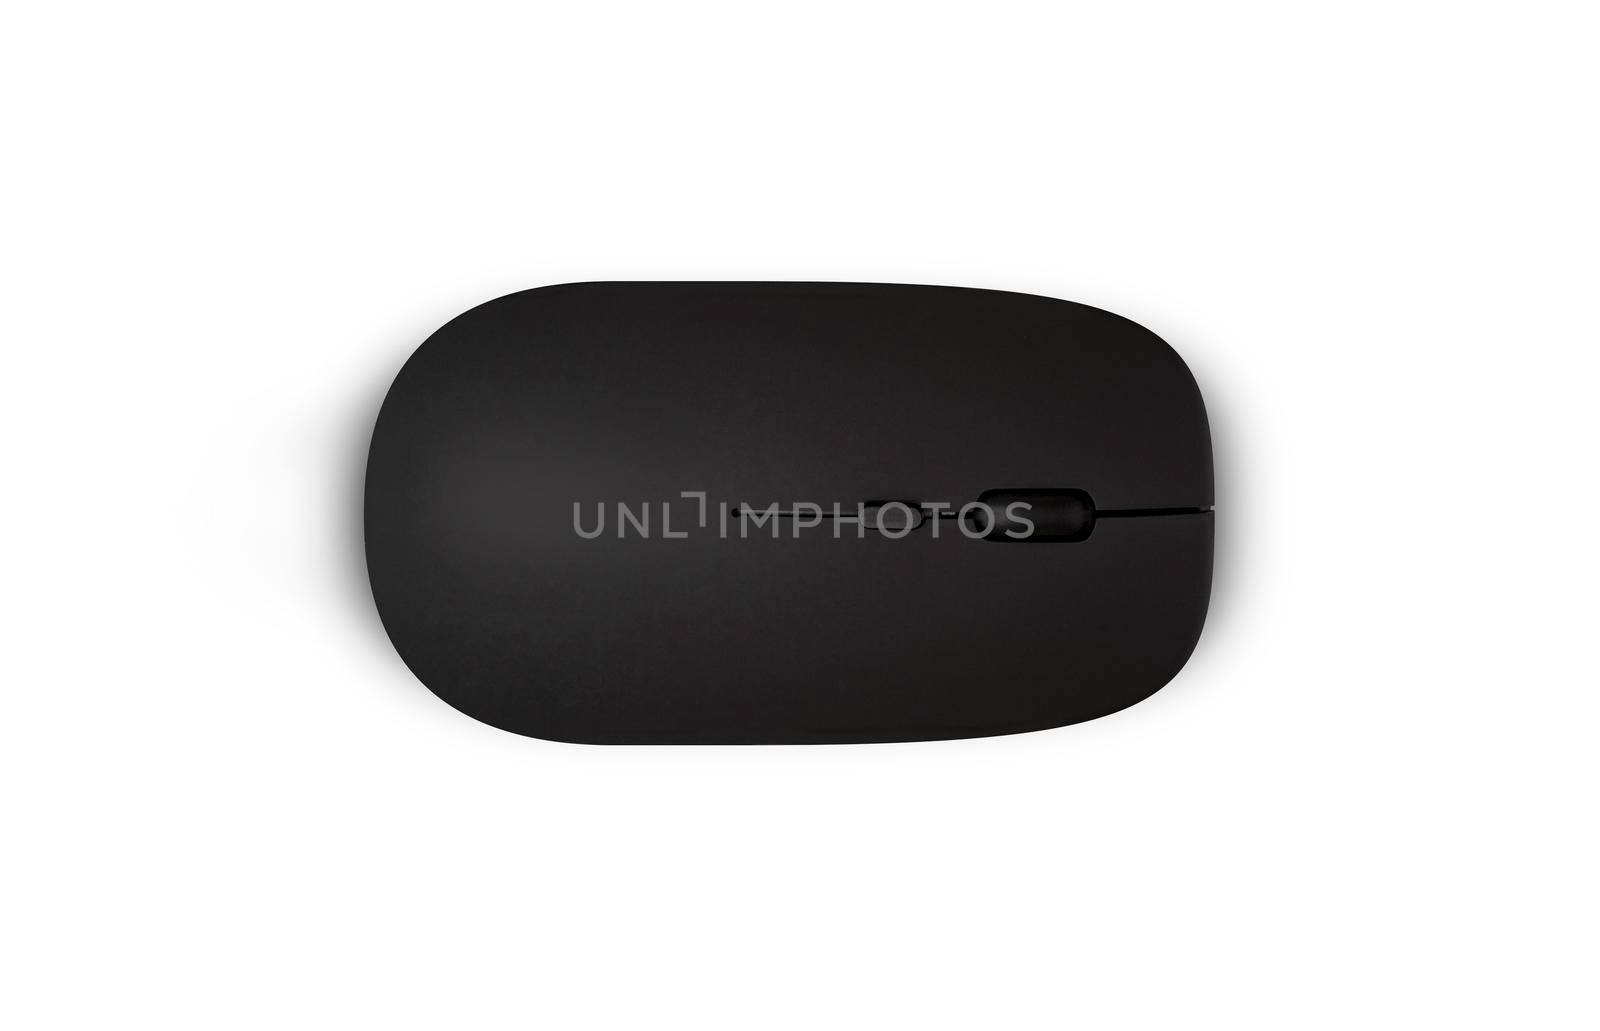 Wireless black mouse. Isolated on white background with clipping path by SlayCer